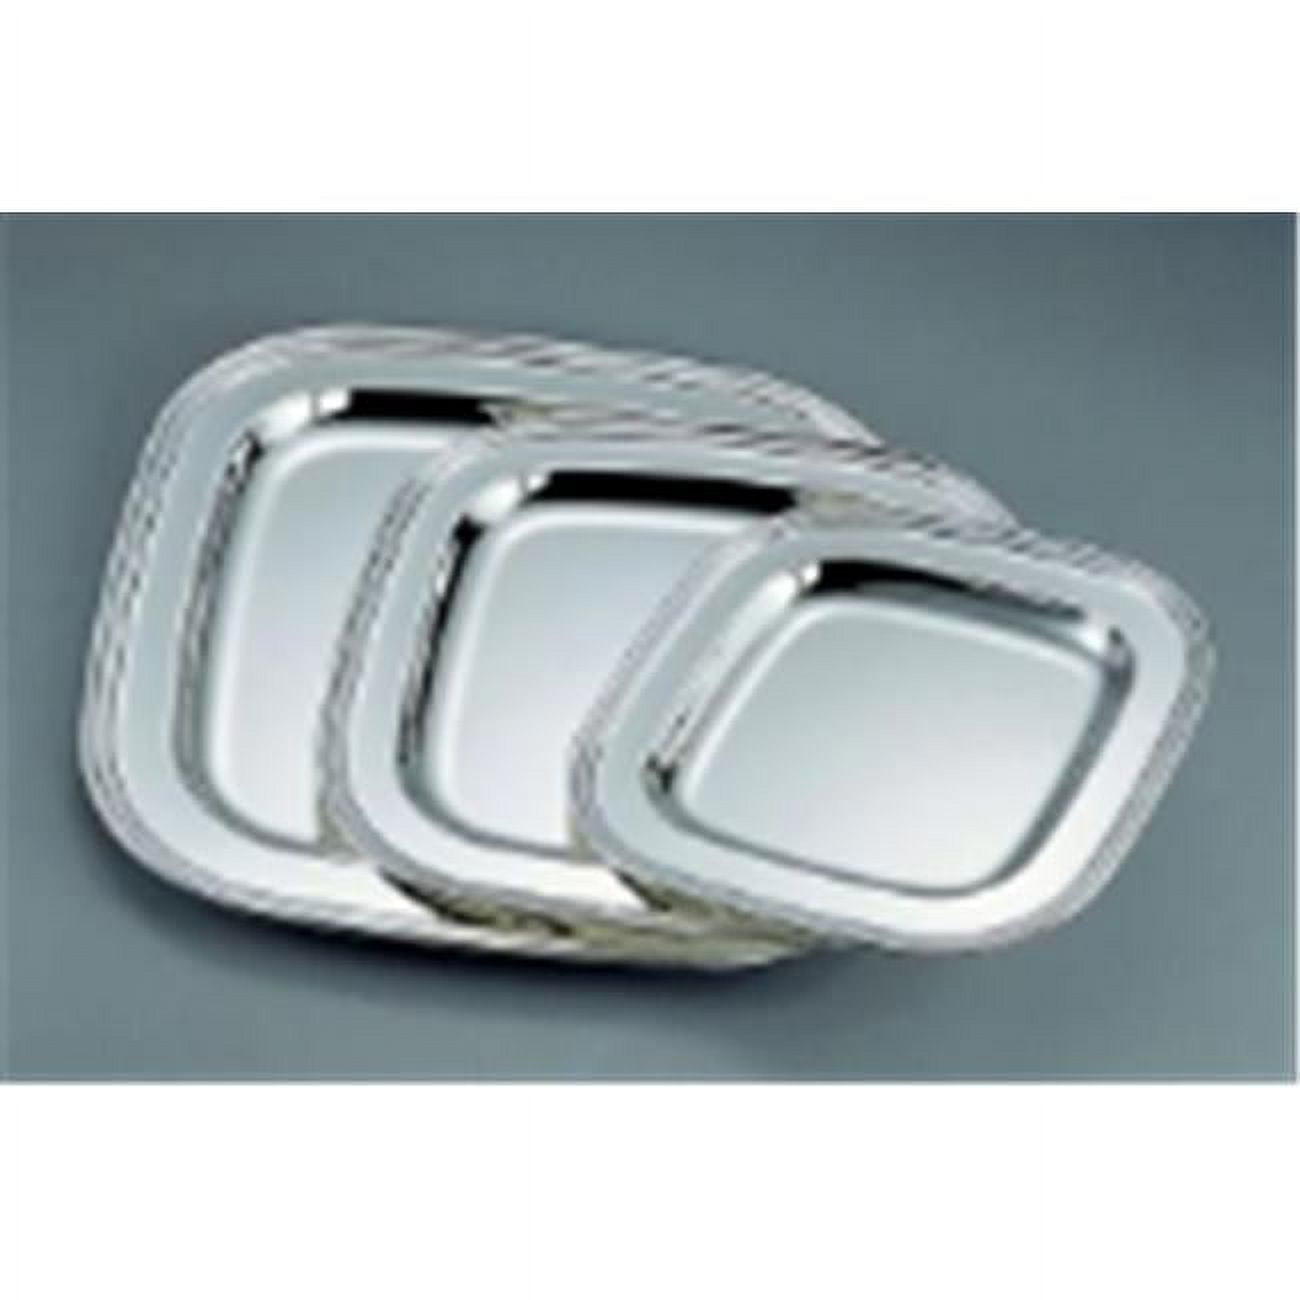 22109 9.5 In. Nickel Plated Square Tray - Silver